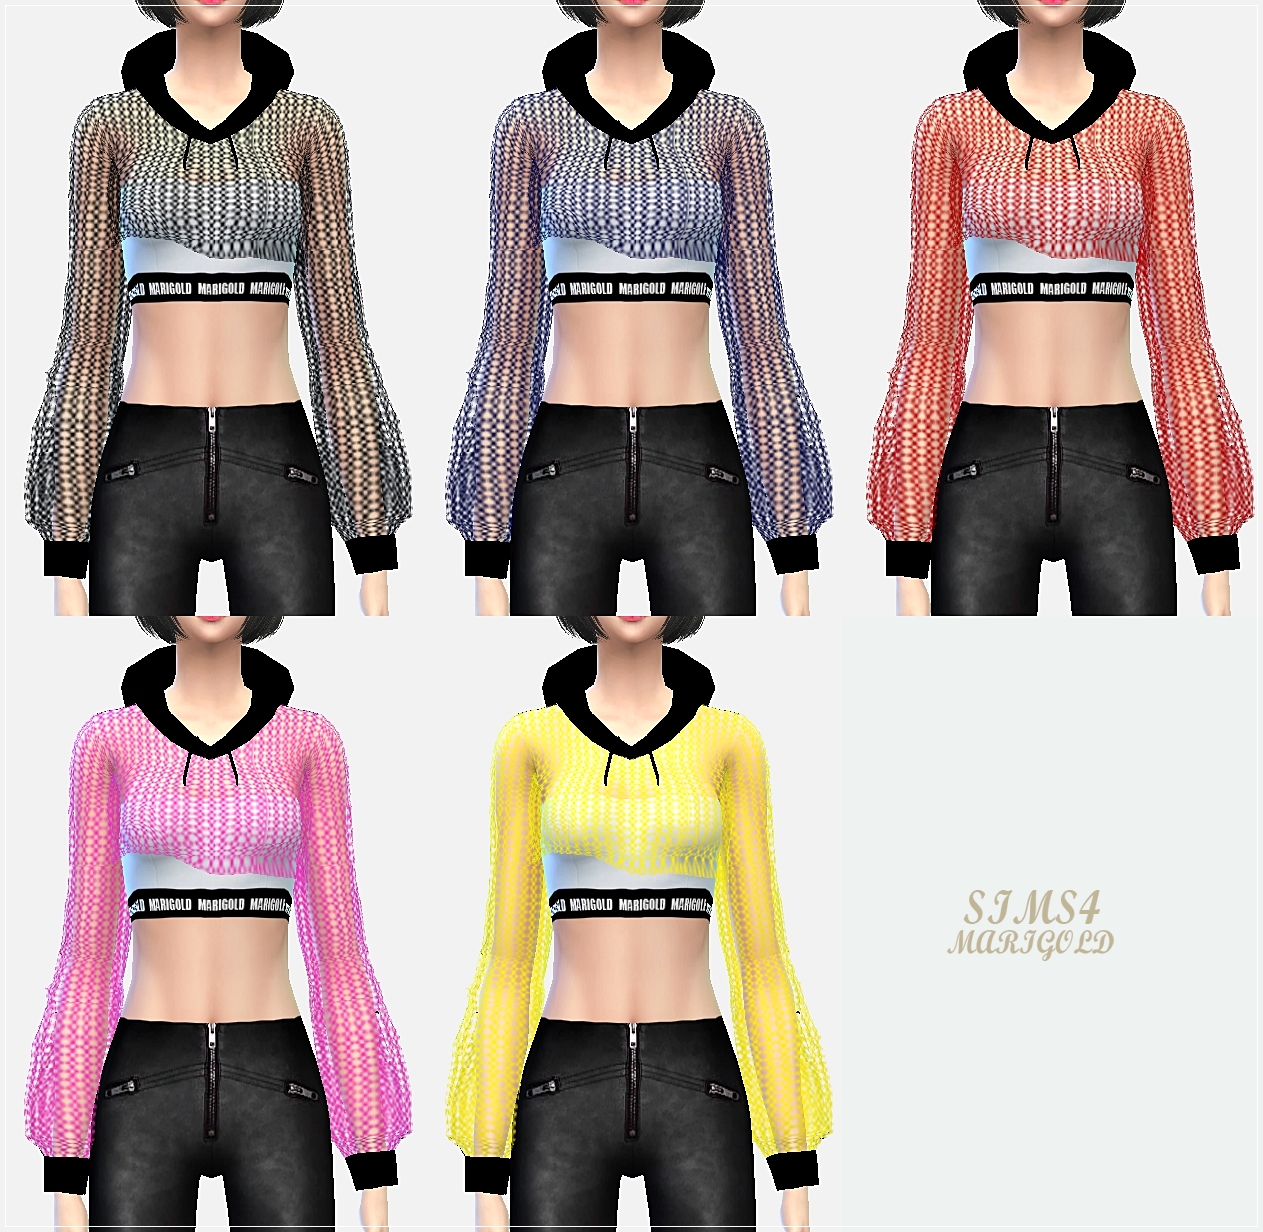 My Sims 4 Blog Mesh Cropped Hoodie For Females By Sims 4 Marigold